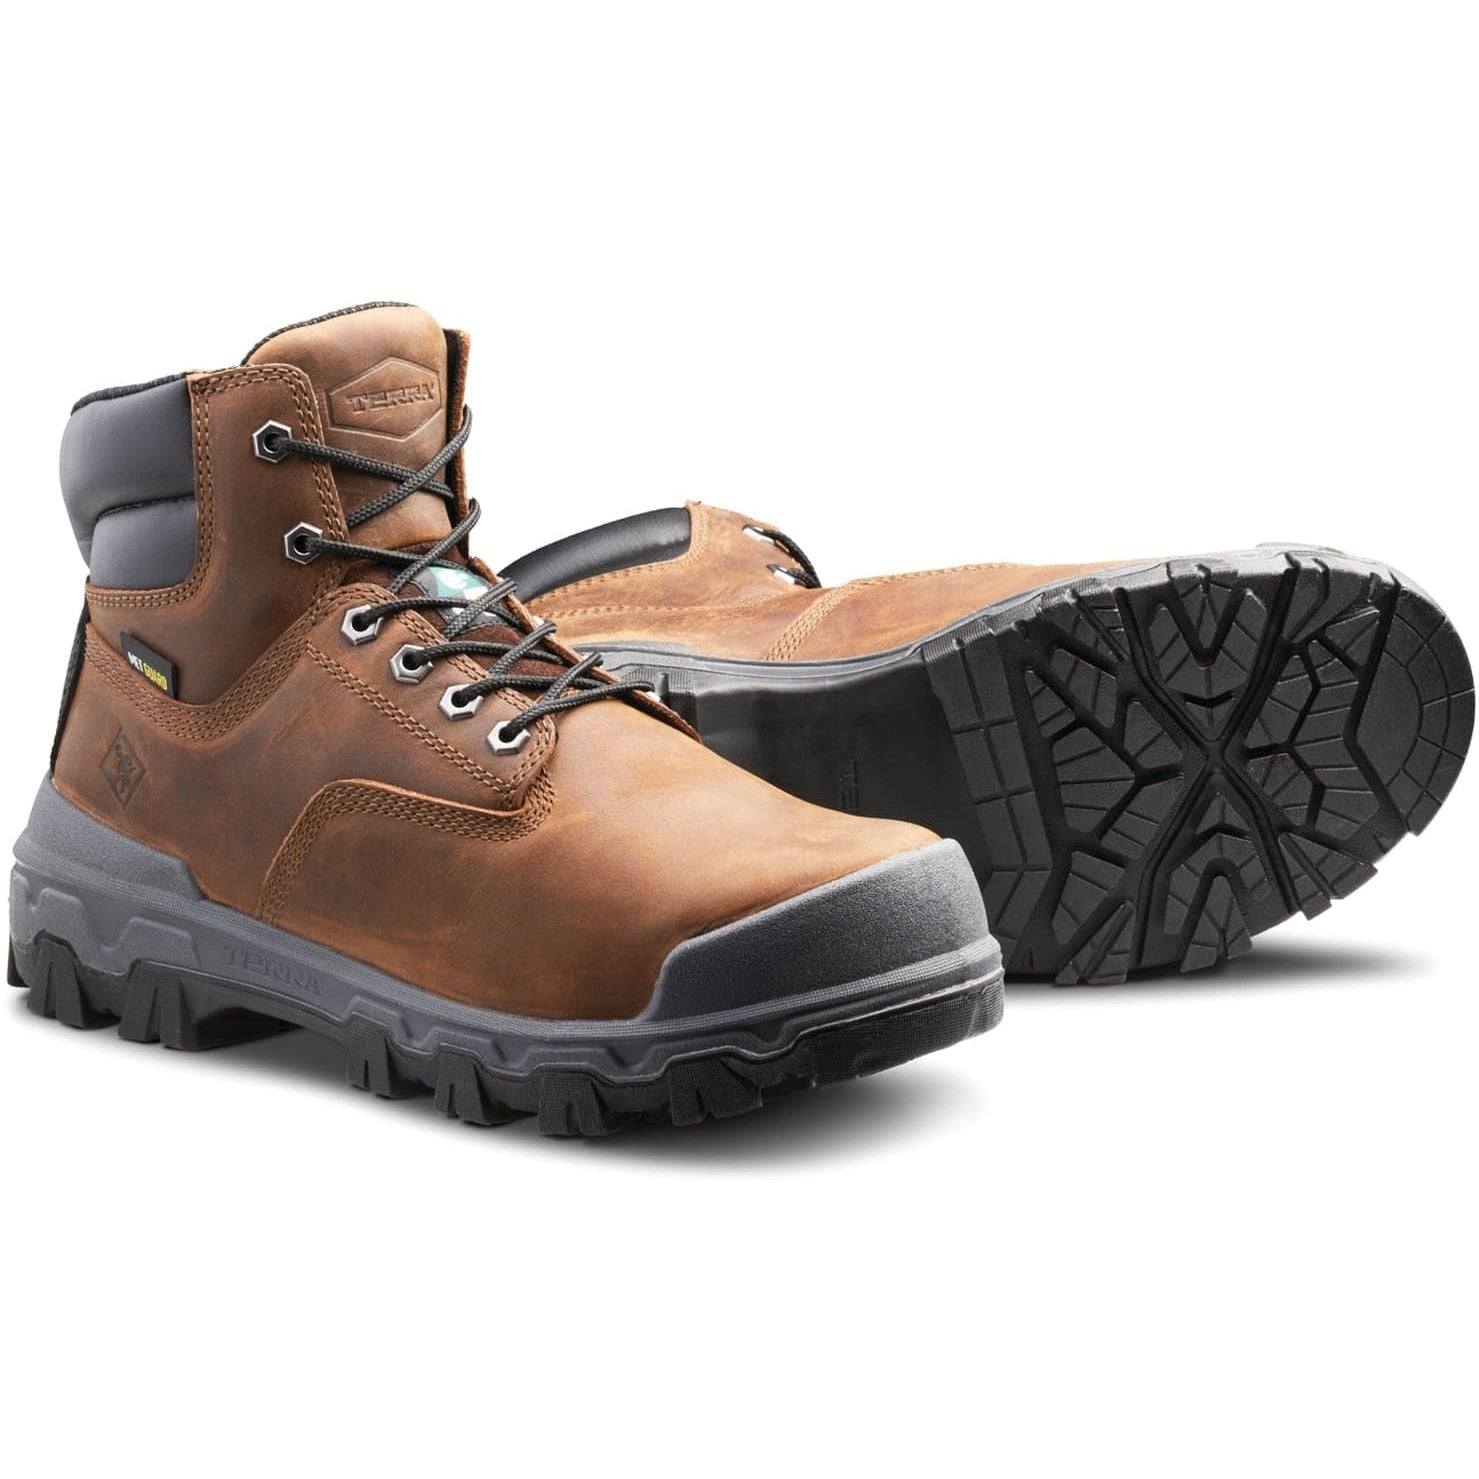 Terra Men's Sentry 2020 6" Comp Toe WP Safety Work Boot -Brown- R4NWBN  - Overlook Boots